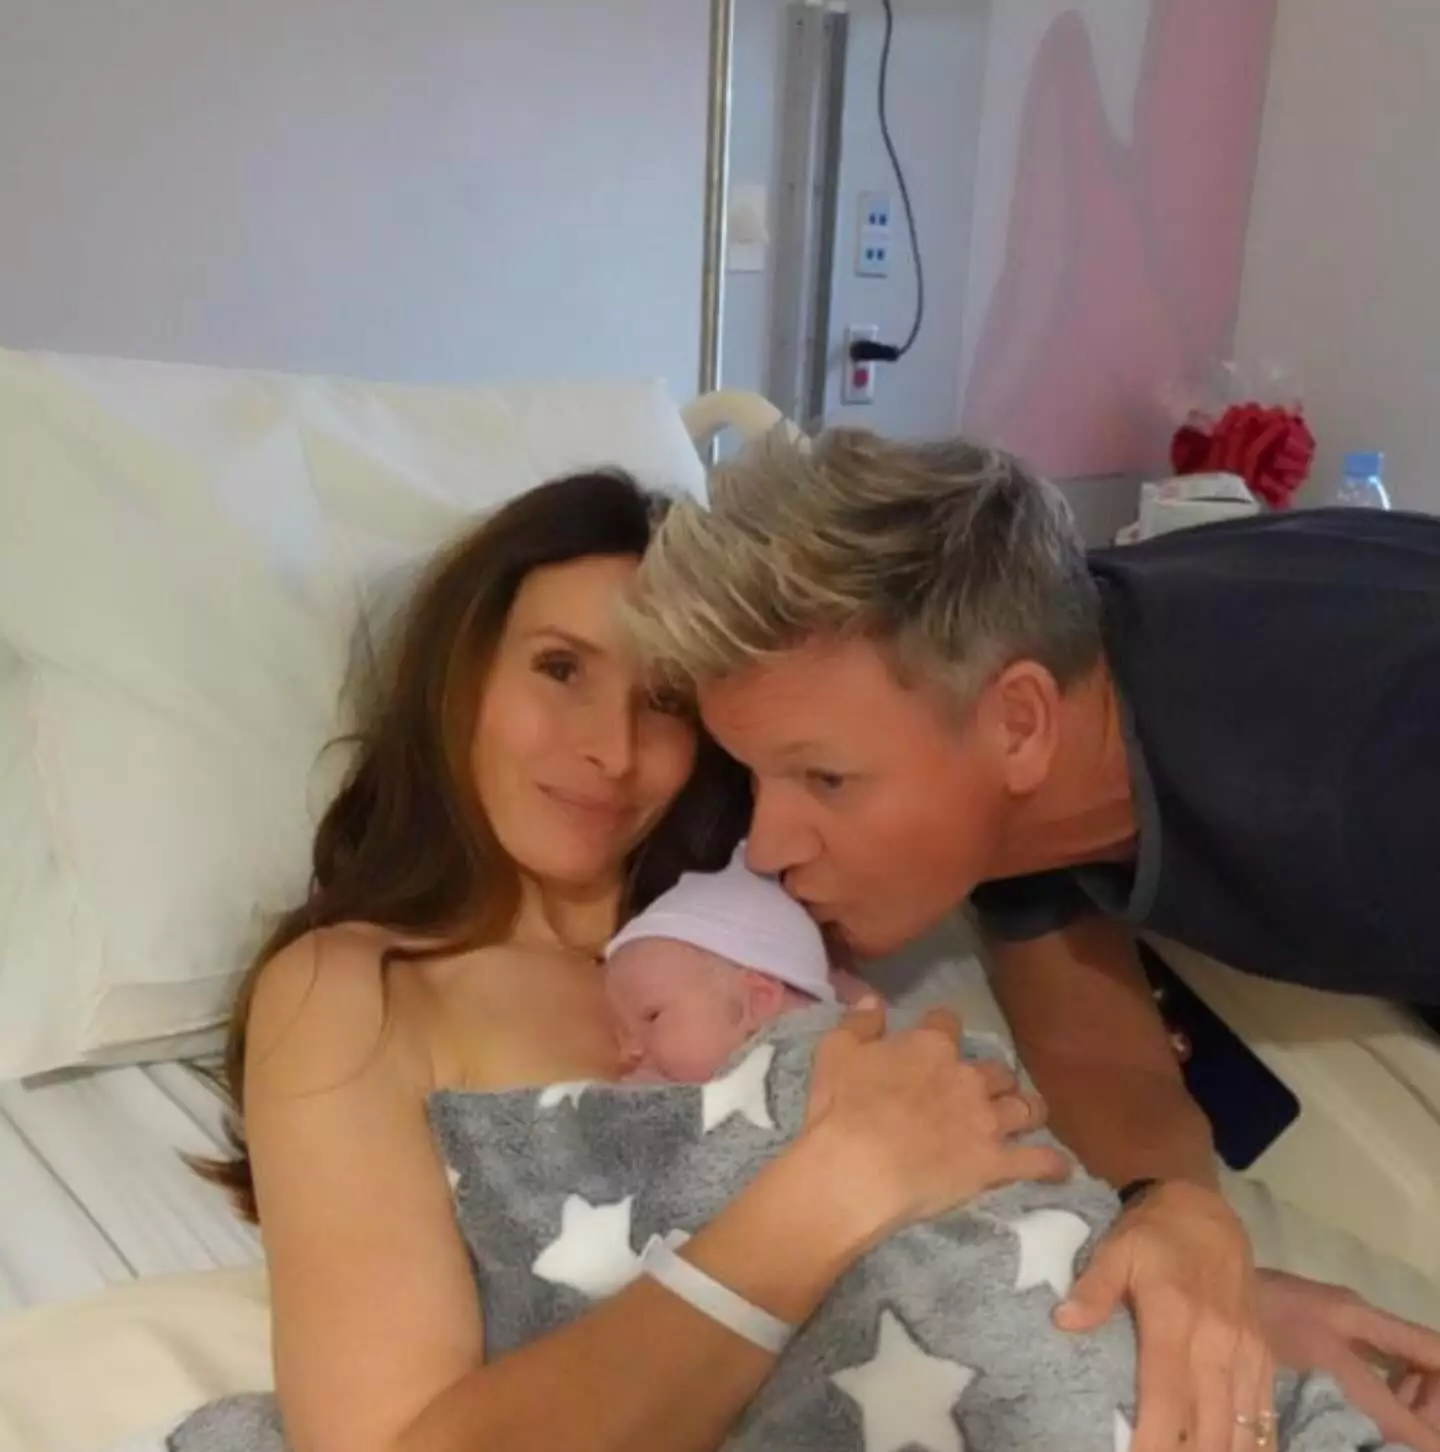 Gordon and Tana Ramsay welcomed their son Jesse earlier this month.